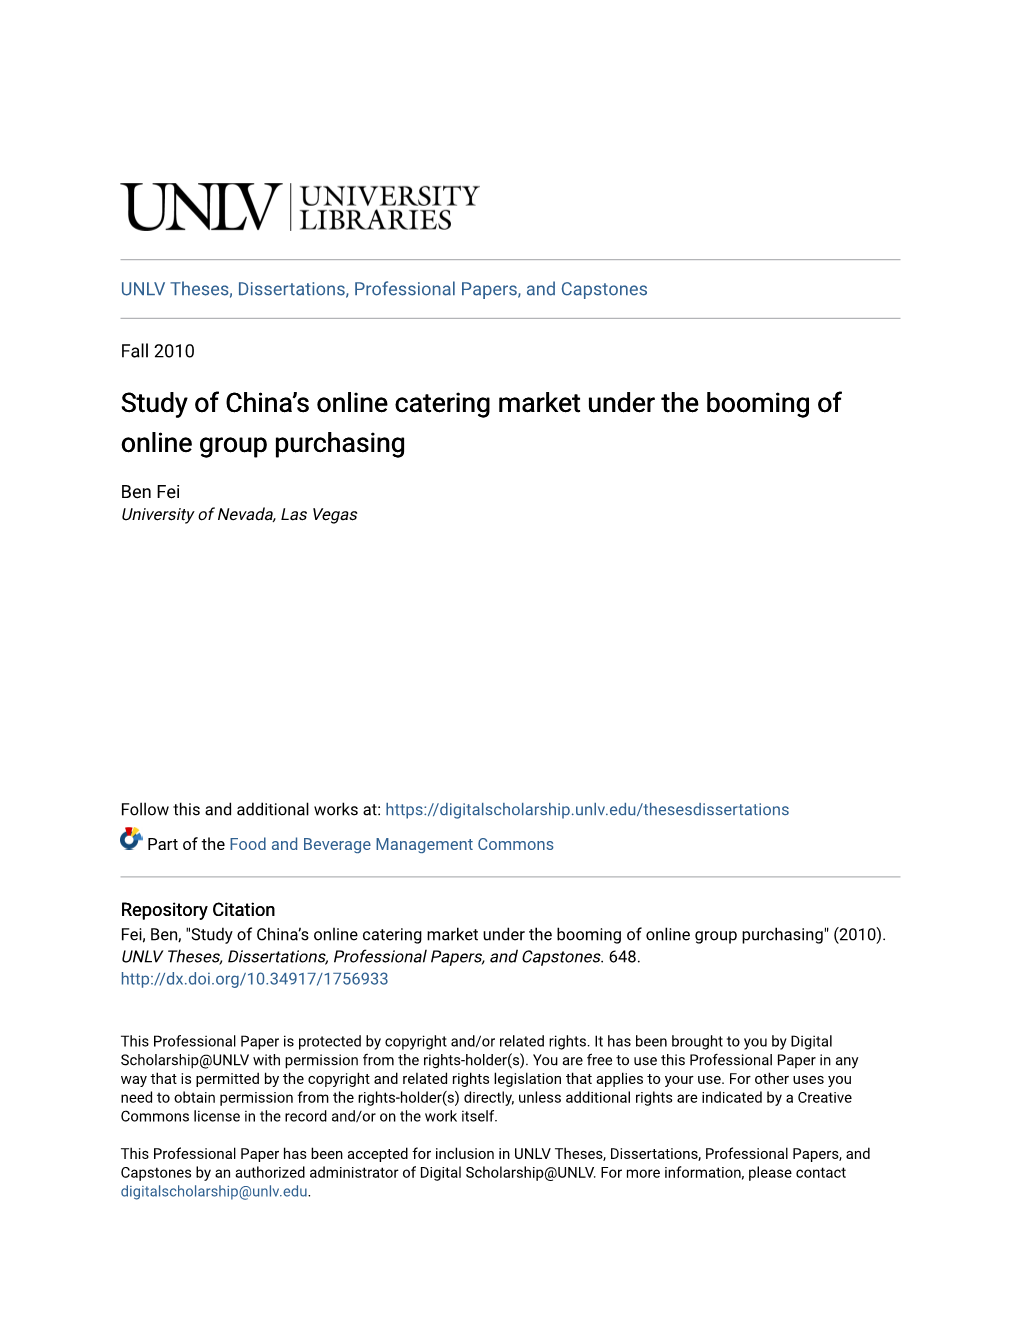 Study of Chinaâ•Žs Online Catering Market Under the Booming of Online